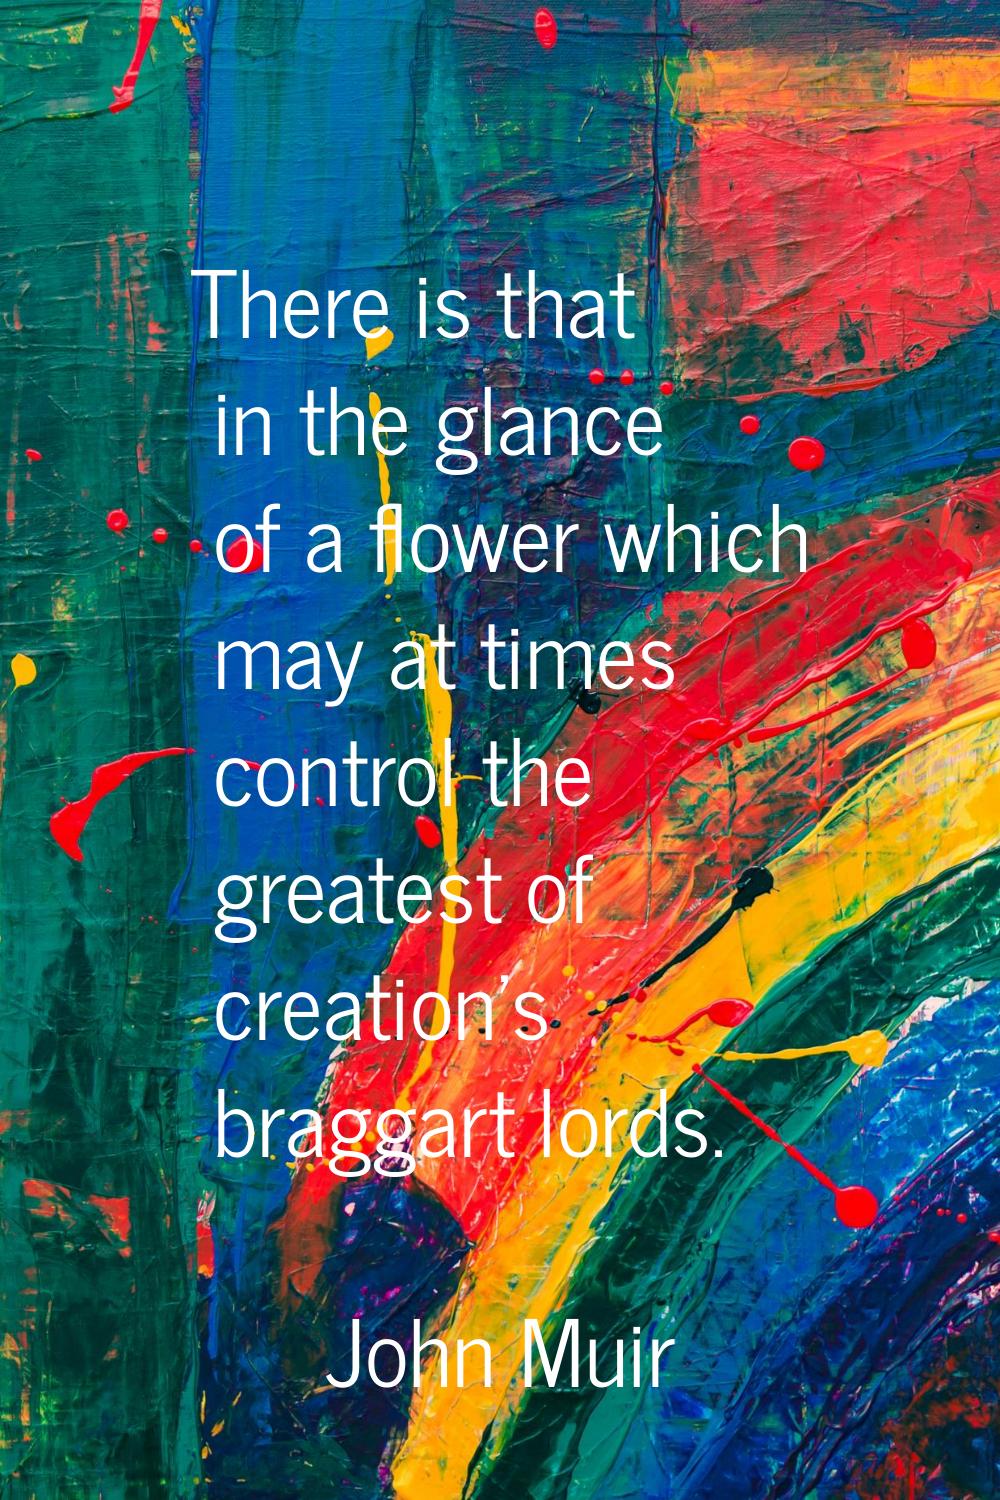 There is that in the glance of a flower which may at times control the greatest of creation's bragg